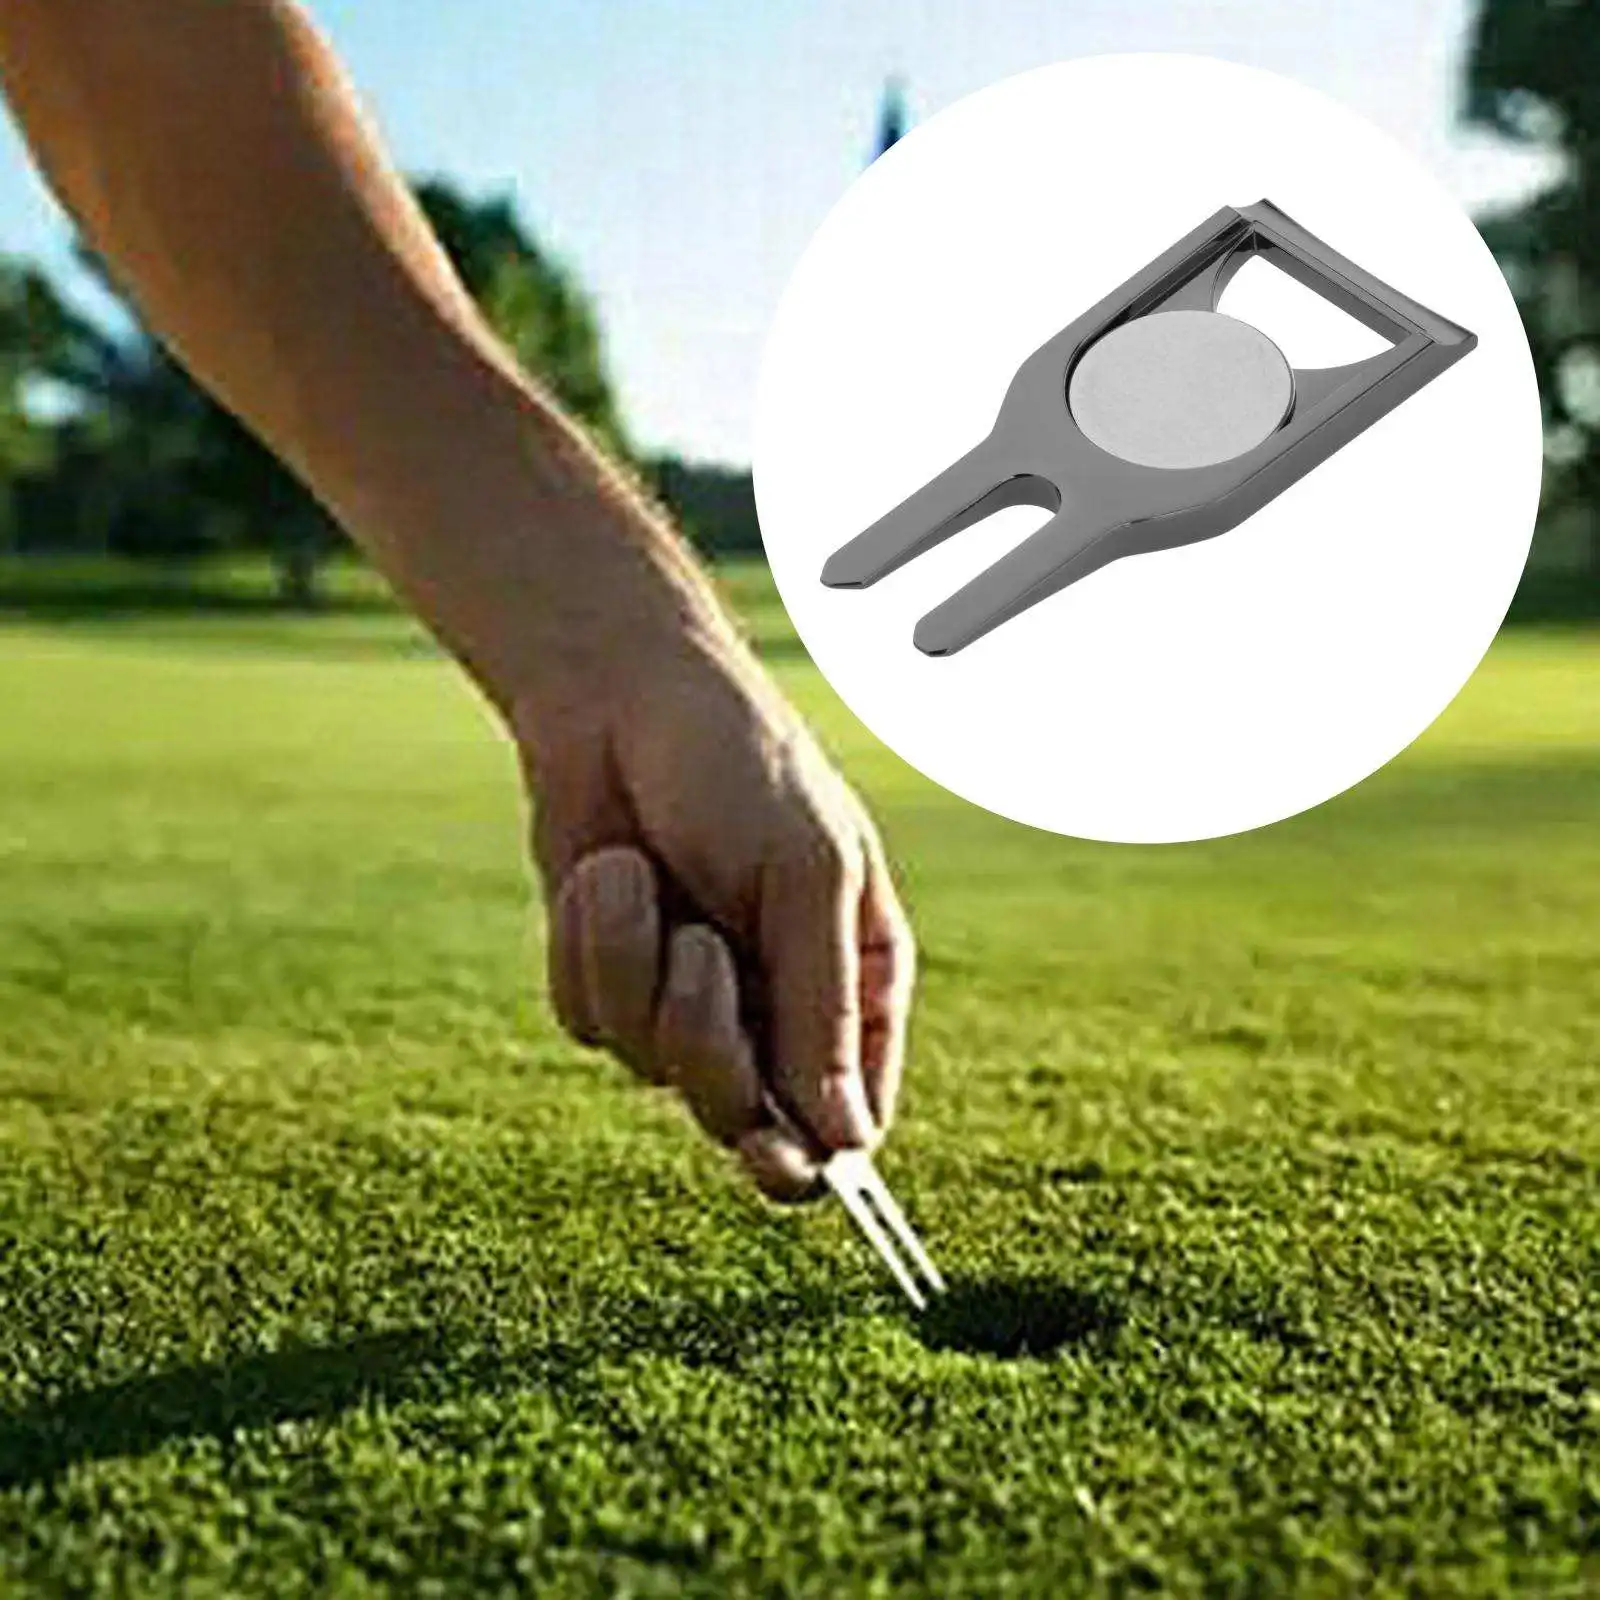 Golf Pitch Mark Score Counter Training Aids Foldable Multifunctional Lawn Golf Divot Portable Putting Green Fork Repair Tools